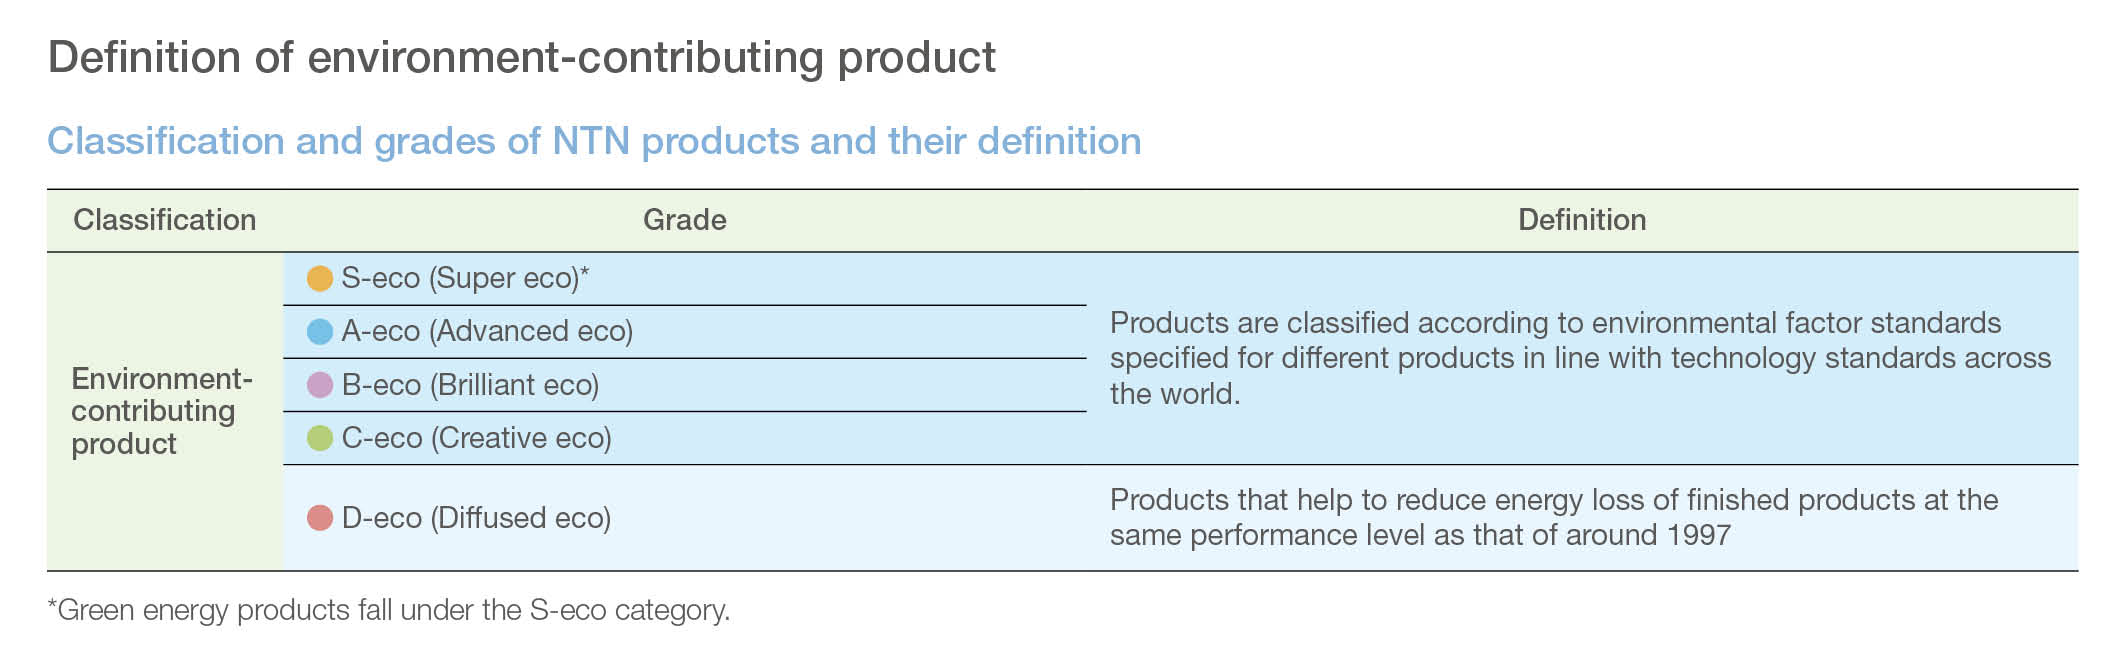 Classification and grades of NTN products and their definition